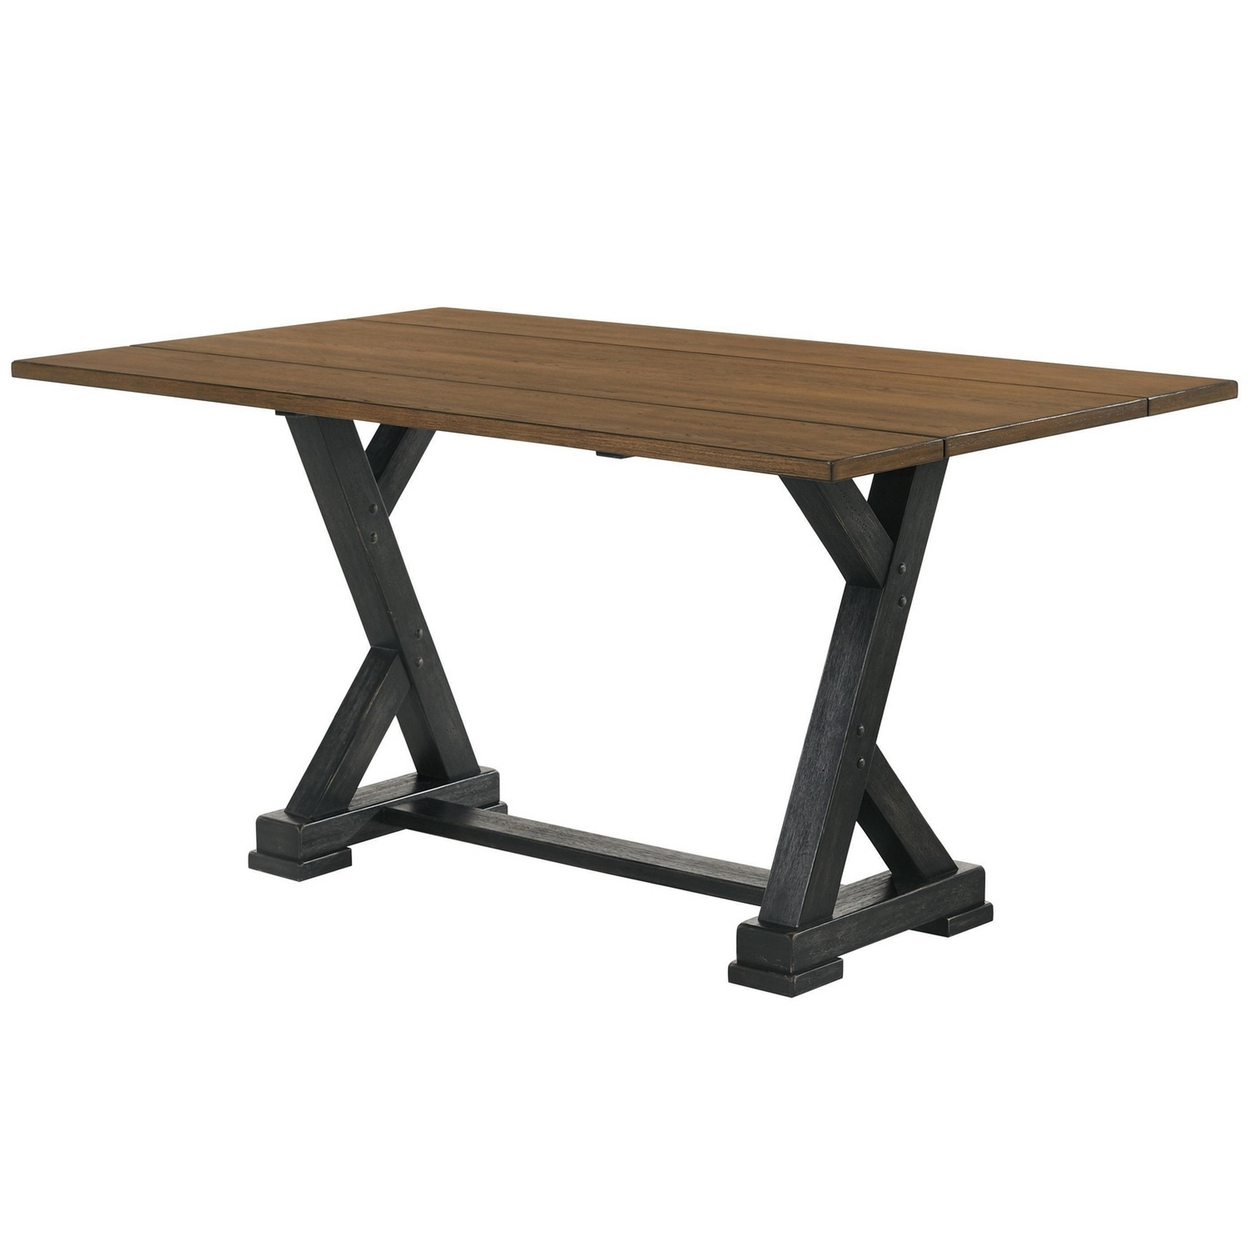 Baez 18-36 Inch Extendable Dining Table, Plank Top, Y Shaped Base, Brown - Saltoro Sherpi